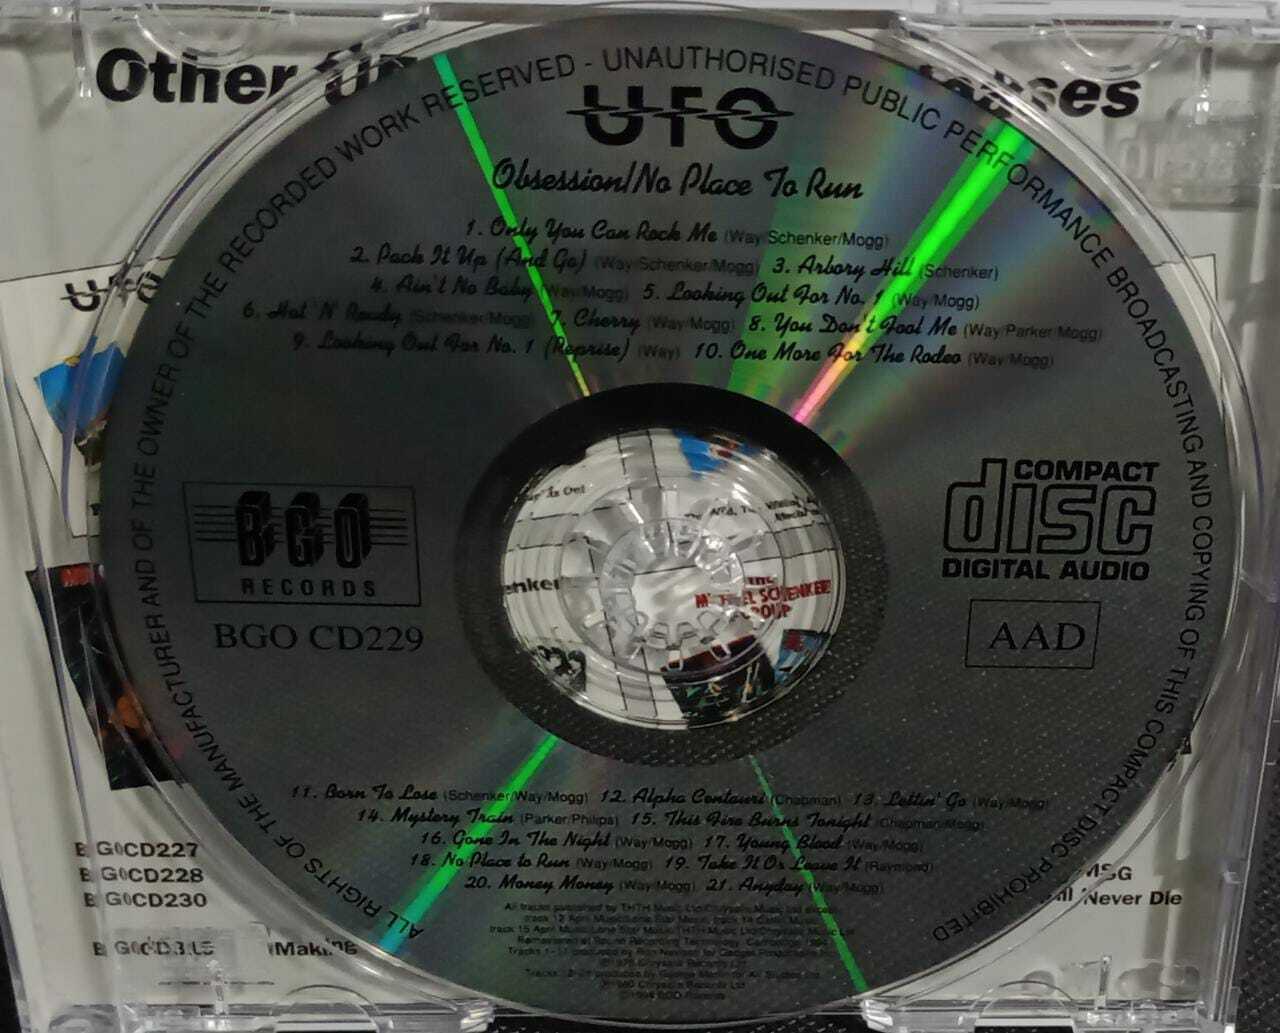 CD - UFO - Obsession / No Place to Run (England)